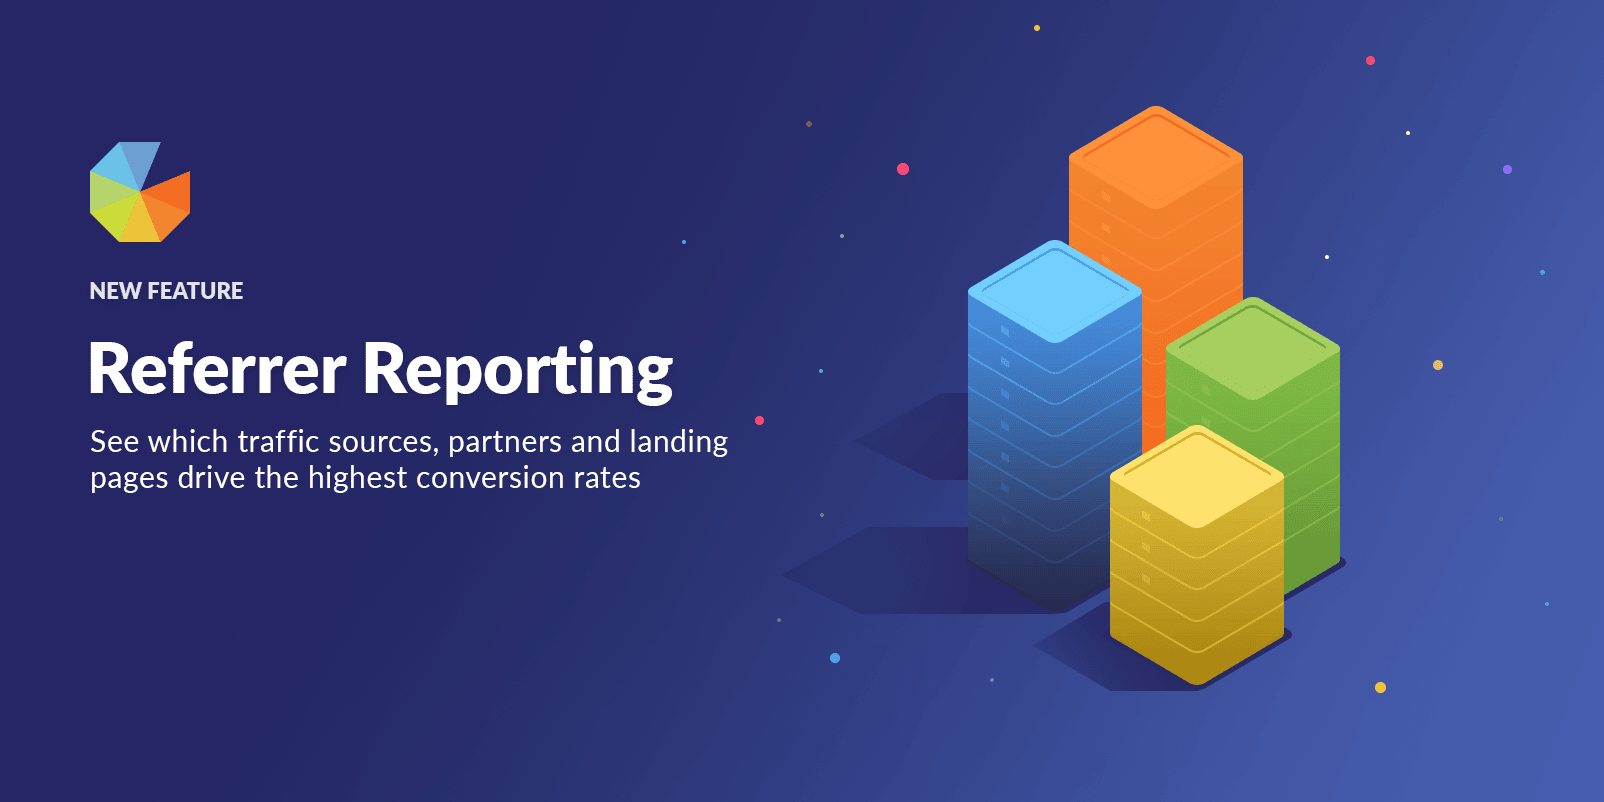 New feature: Referrer Reporting for Gleam